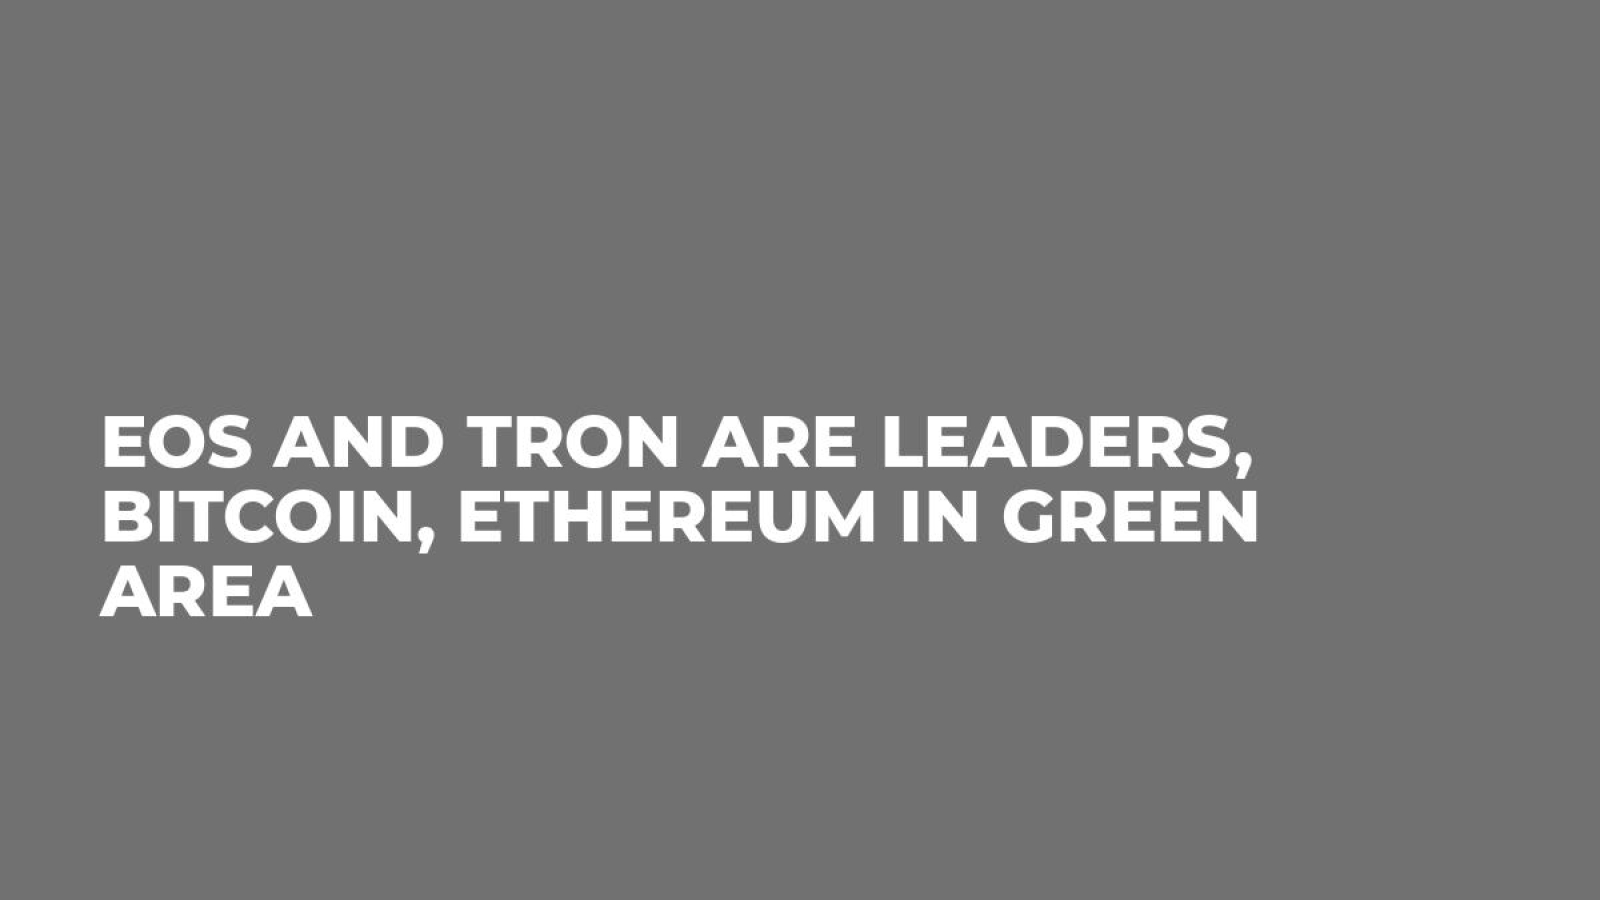 EOS and Tron Are Leaders, Bitcoin, Ethereum in Green Area